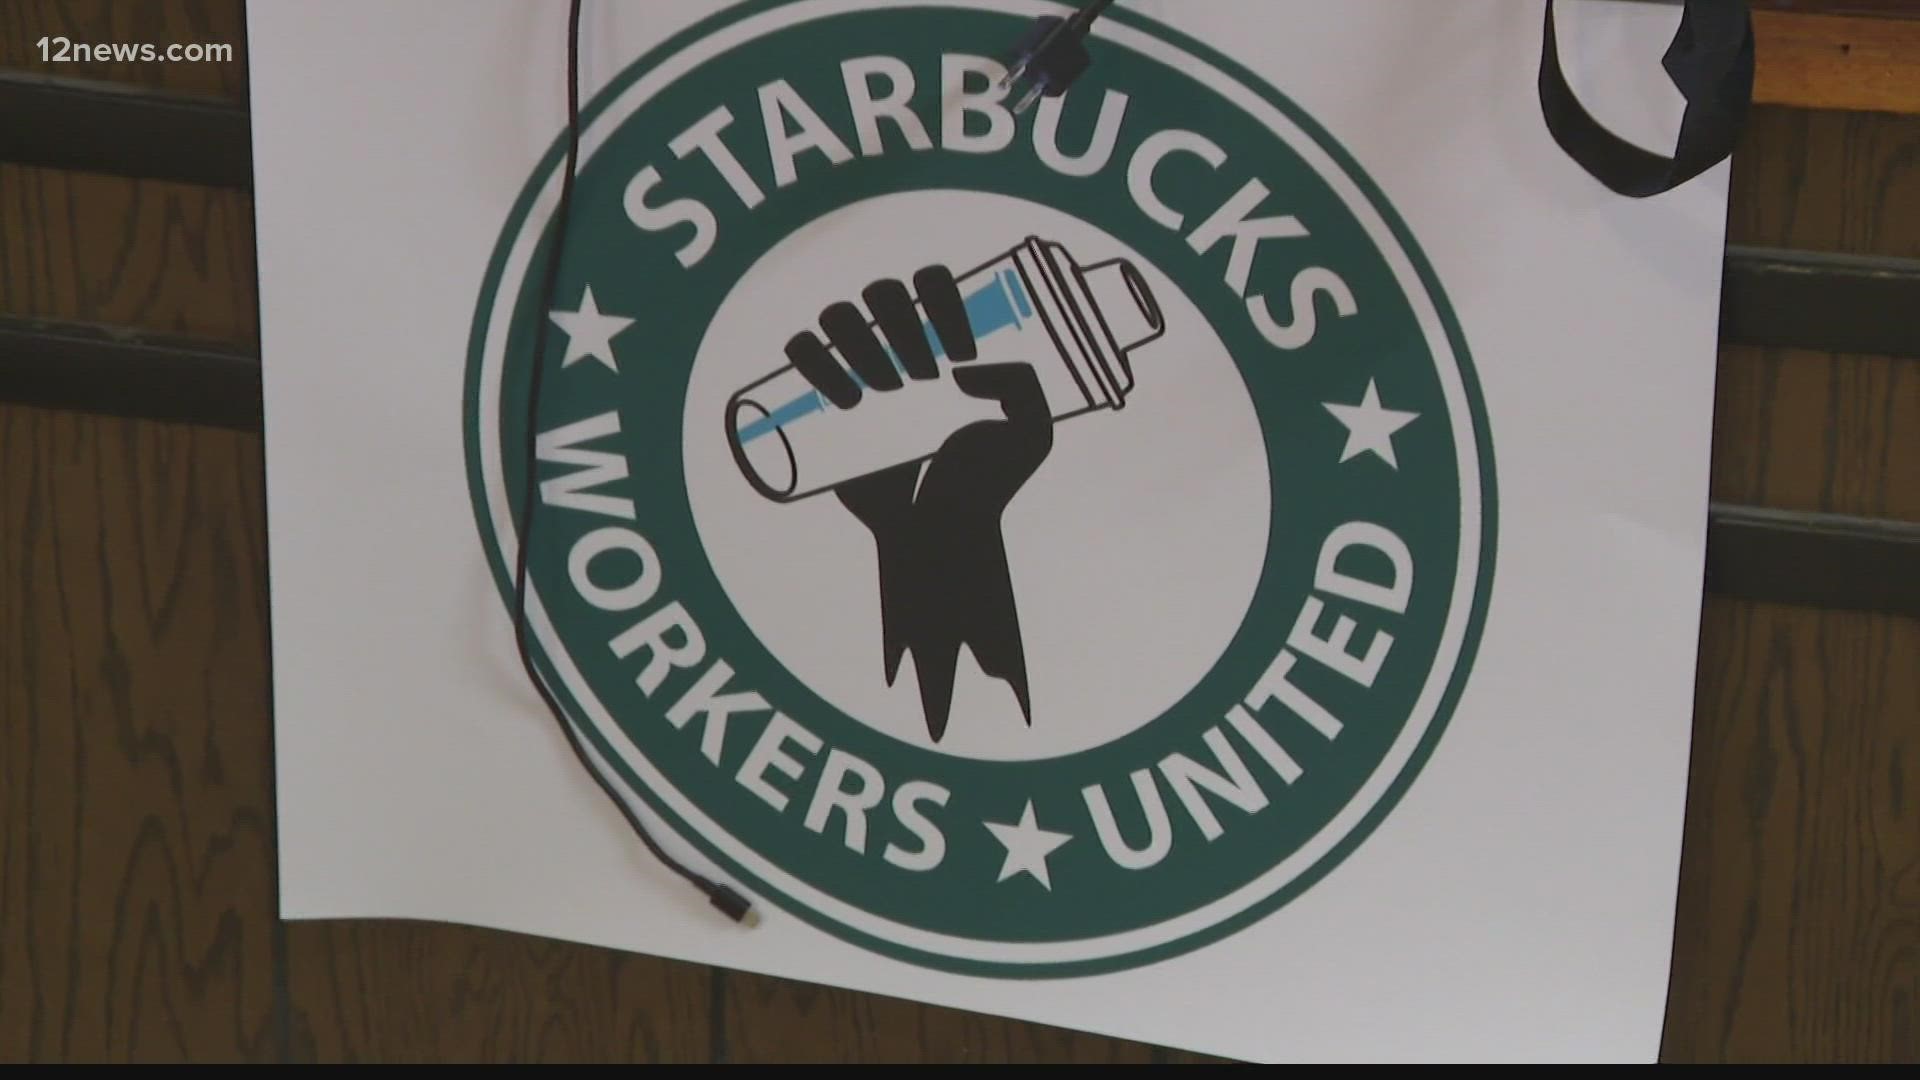 Union plans are on pause for Starbucks workers in Mesa. The vote to join or not to join the union was delayed after the company filed a request for review.